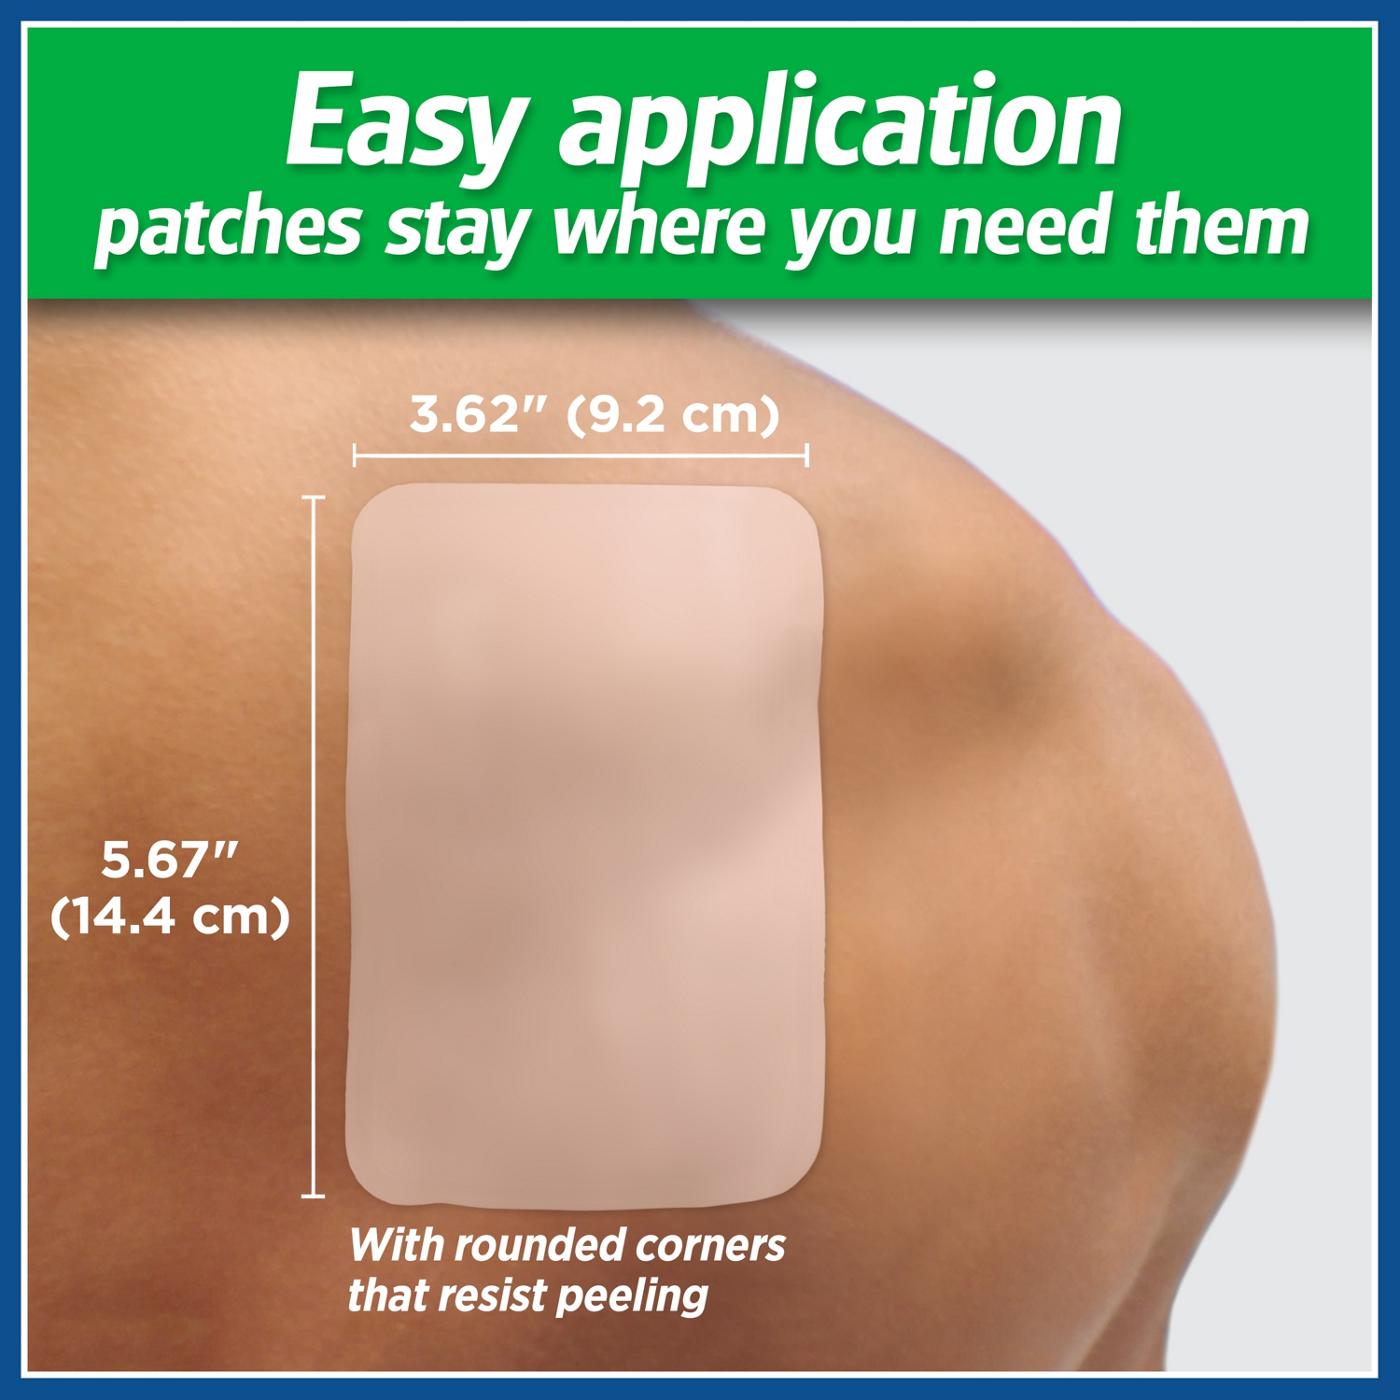 Salonpas Pain Relieving Patch, Large; image 6 of 6